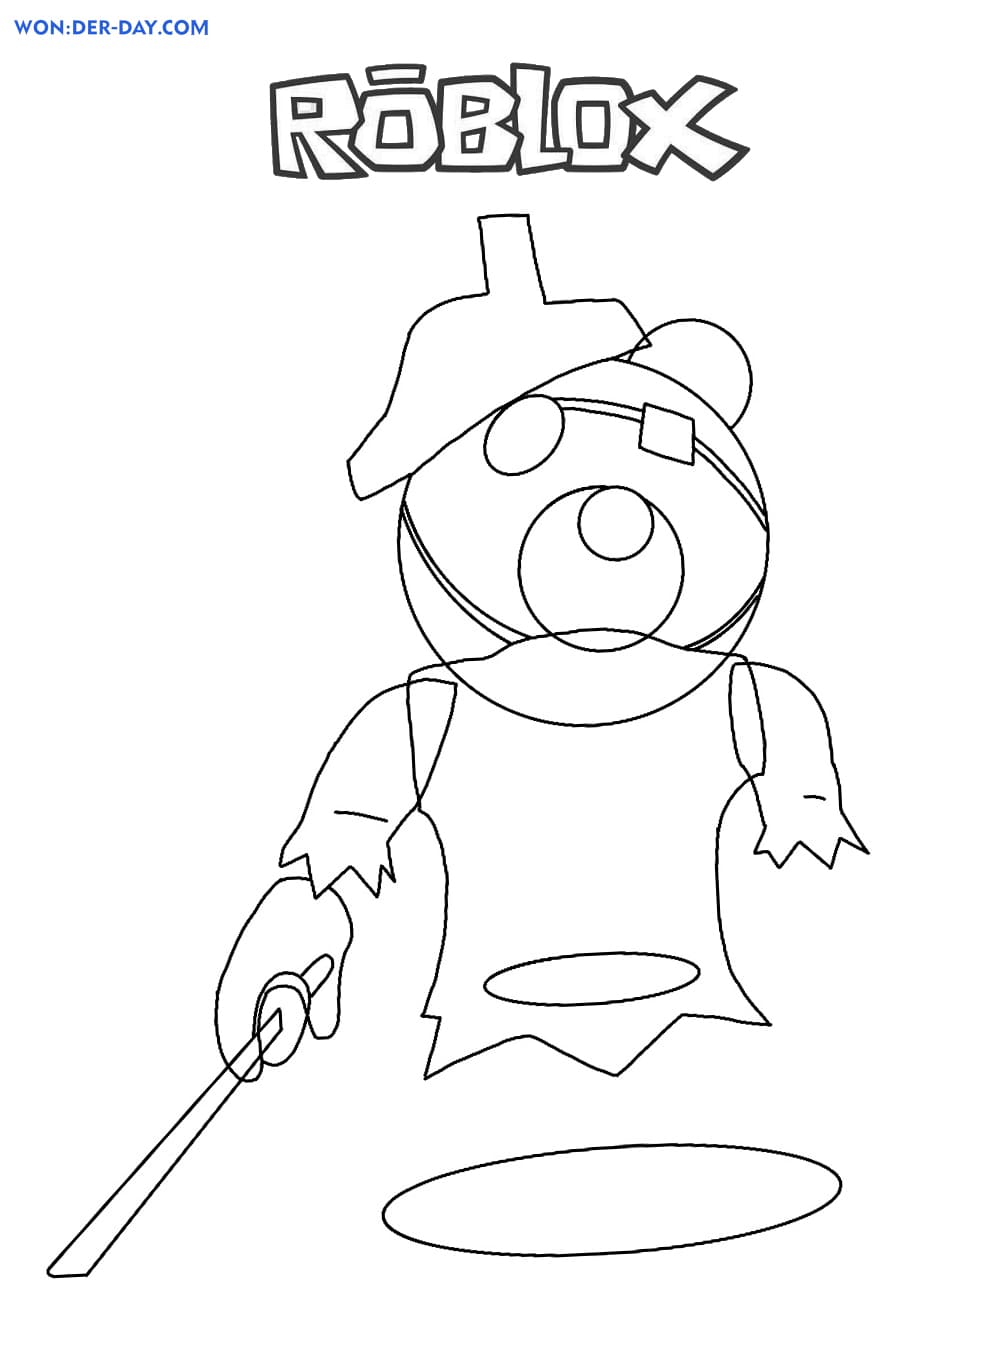 Willow Wolf Piggy Roblox coloring page  Cute coloring pages, Transformers  coloring pages, Coloring pages